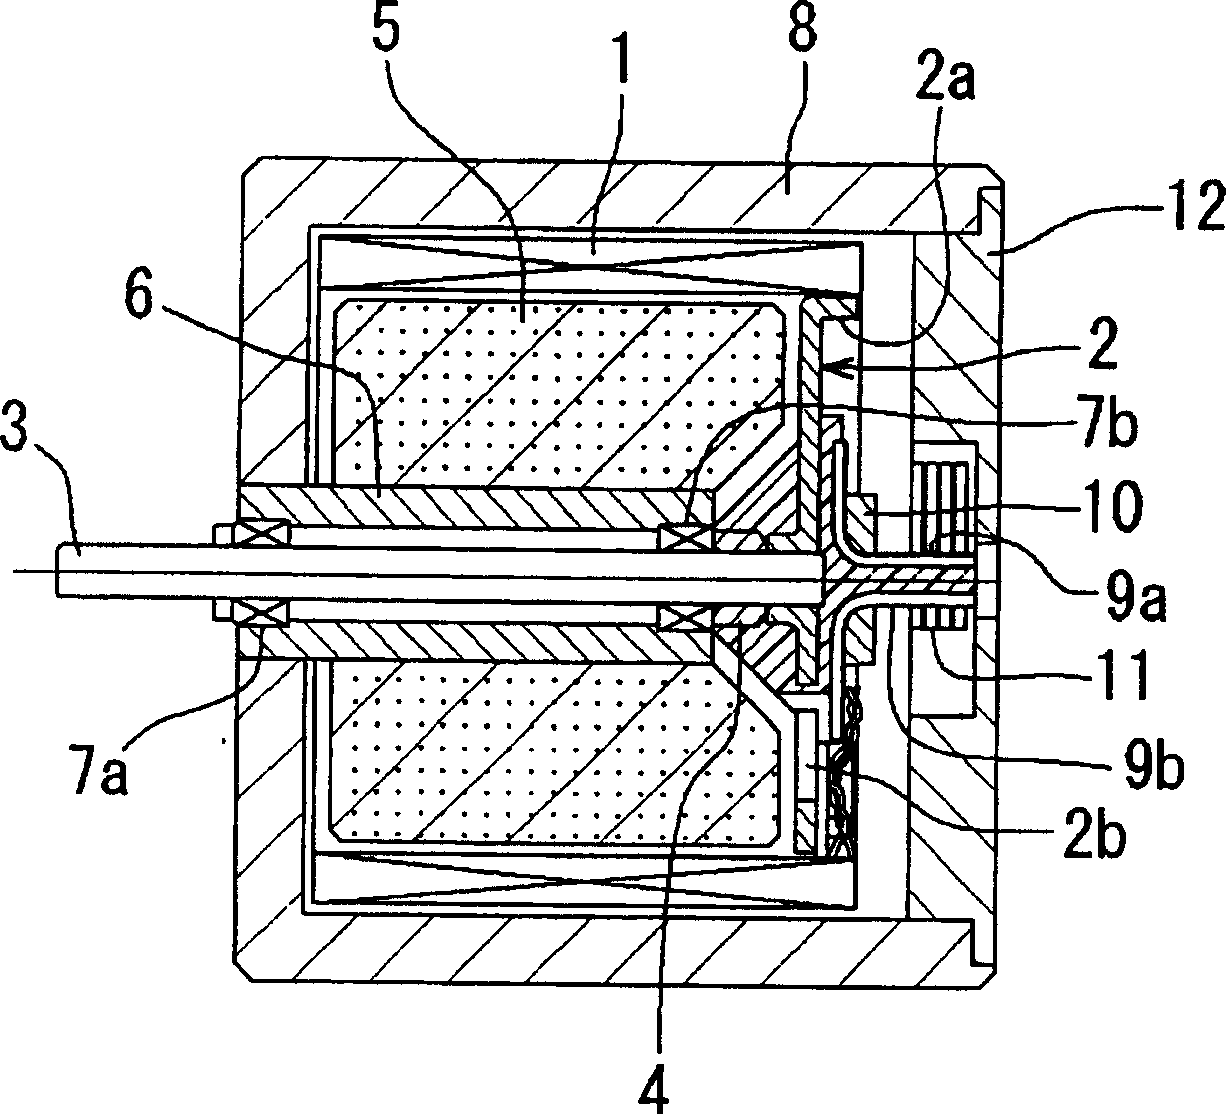 Small size core free motor and wireless operating model game apparatus